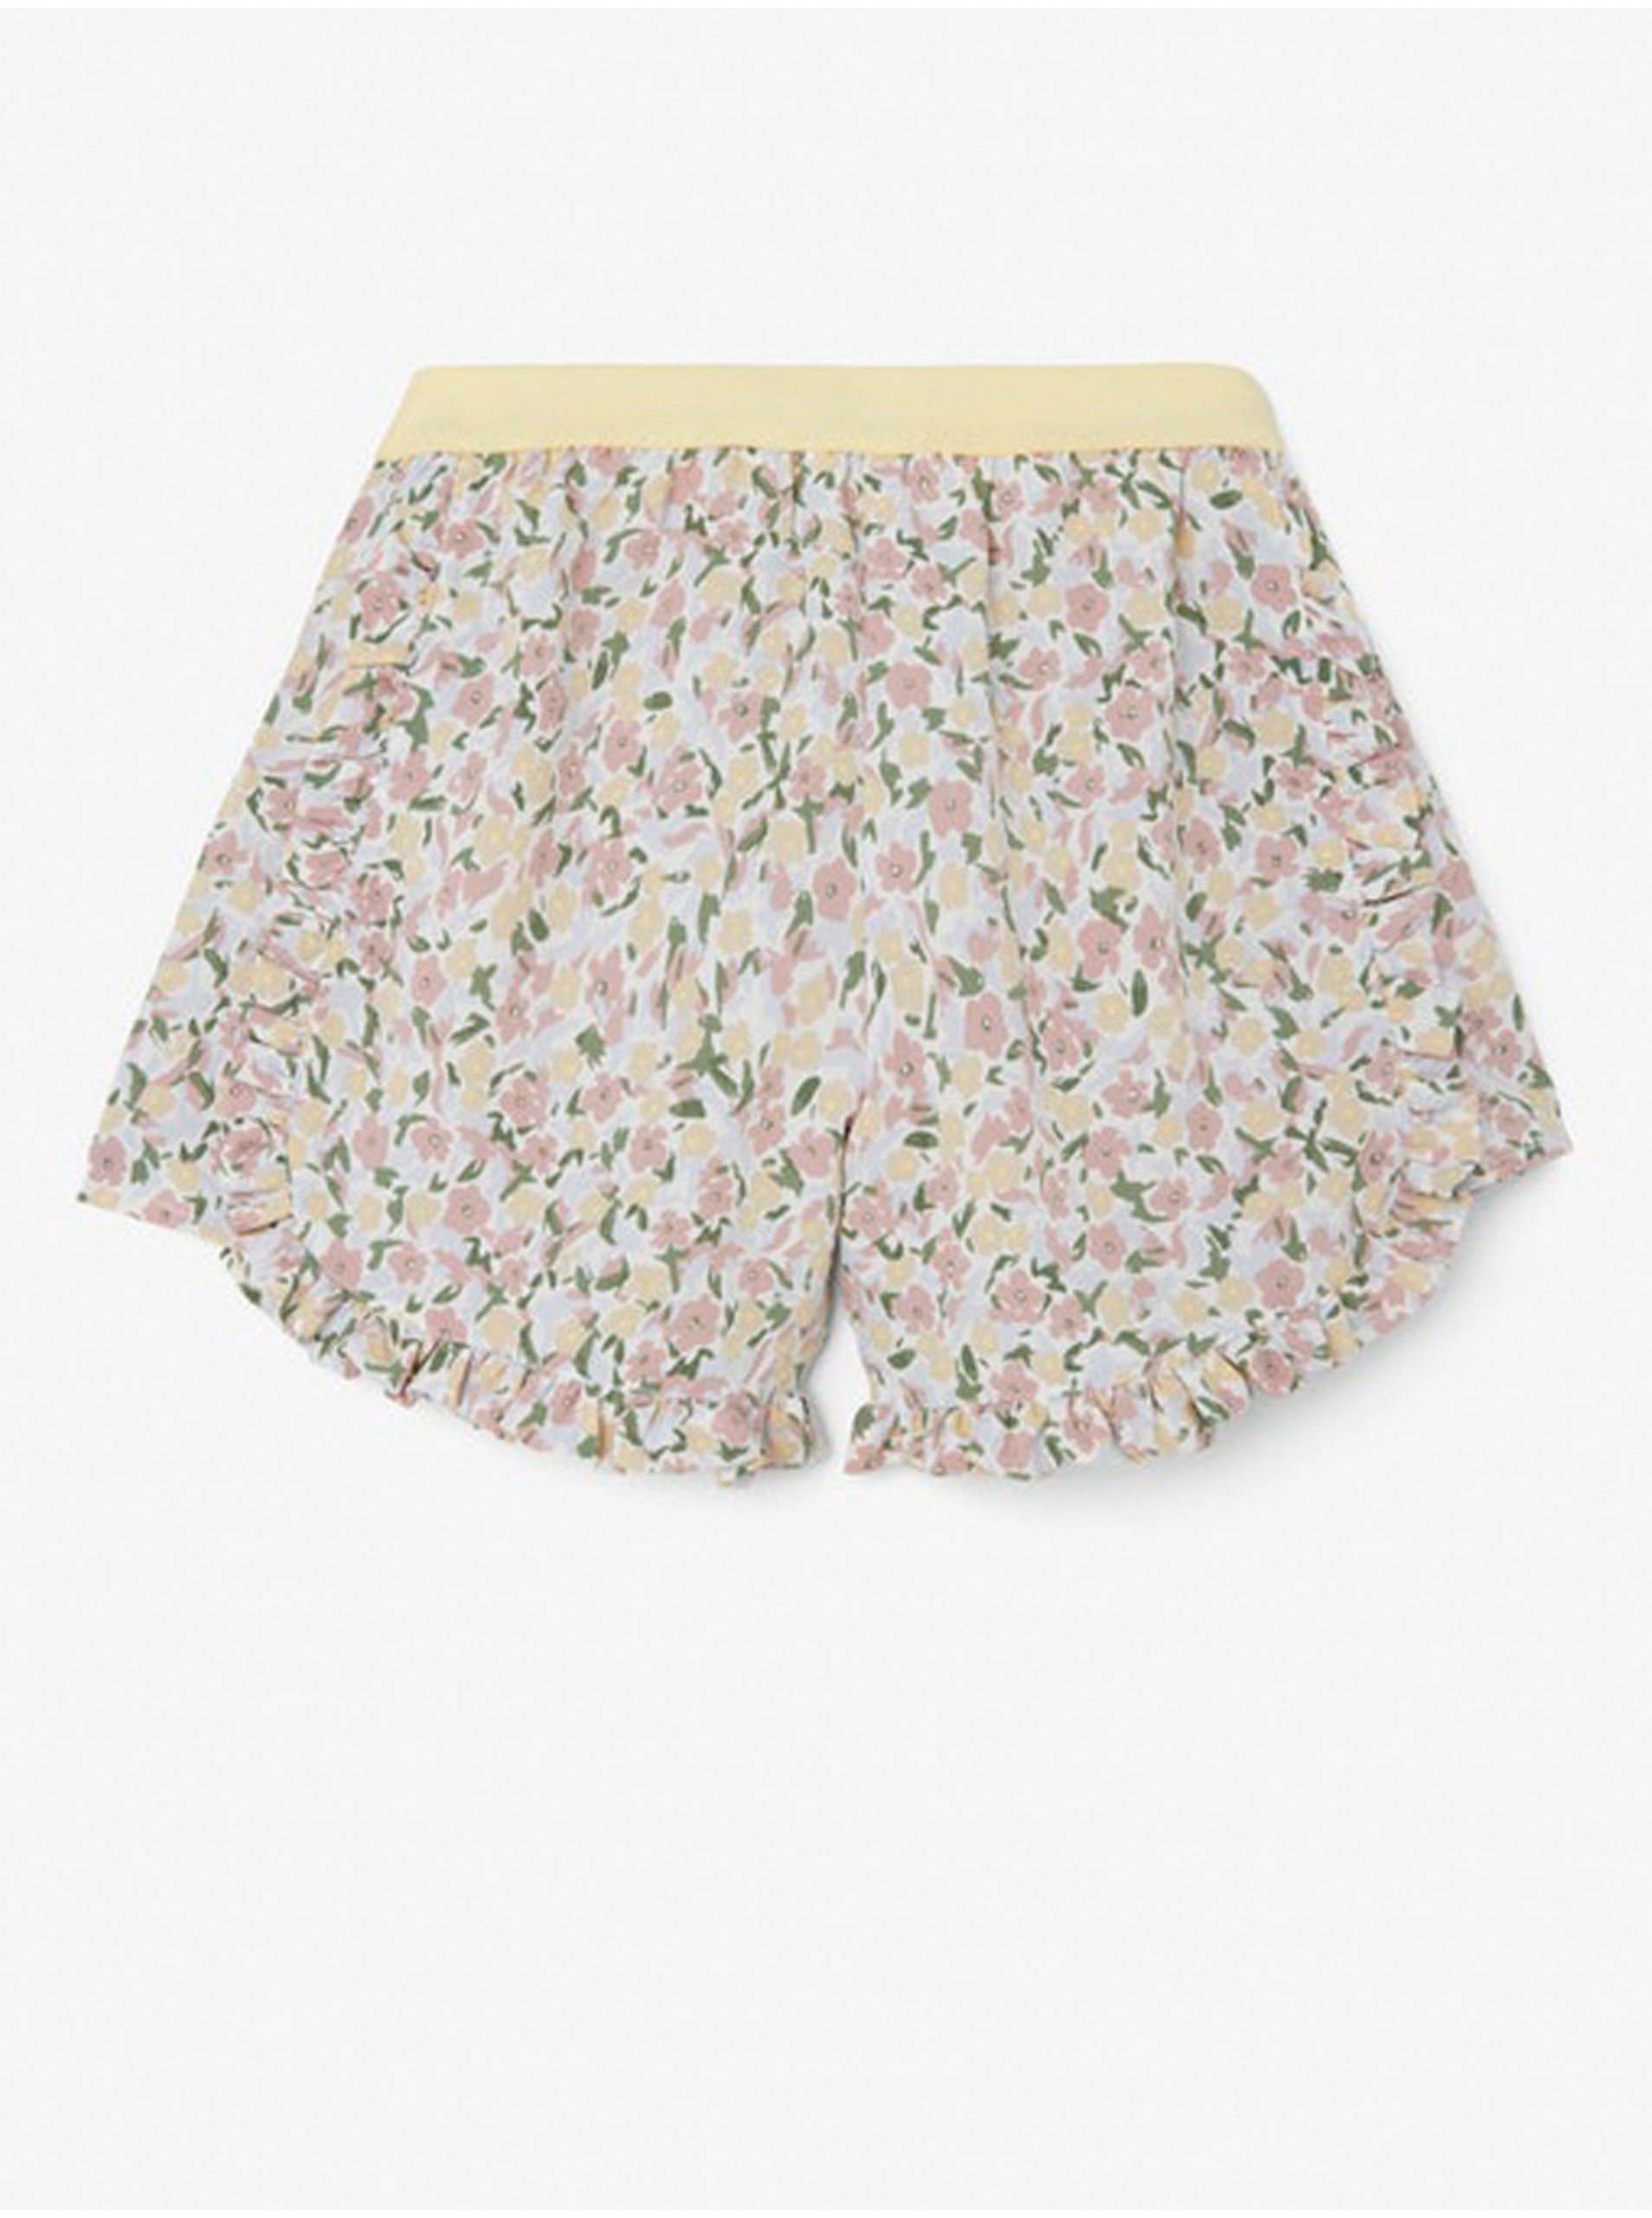 White-pink Girly Floral Shorts Name It Finna - Unisex